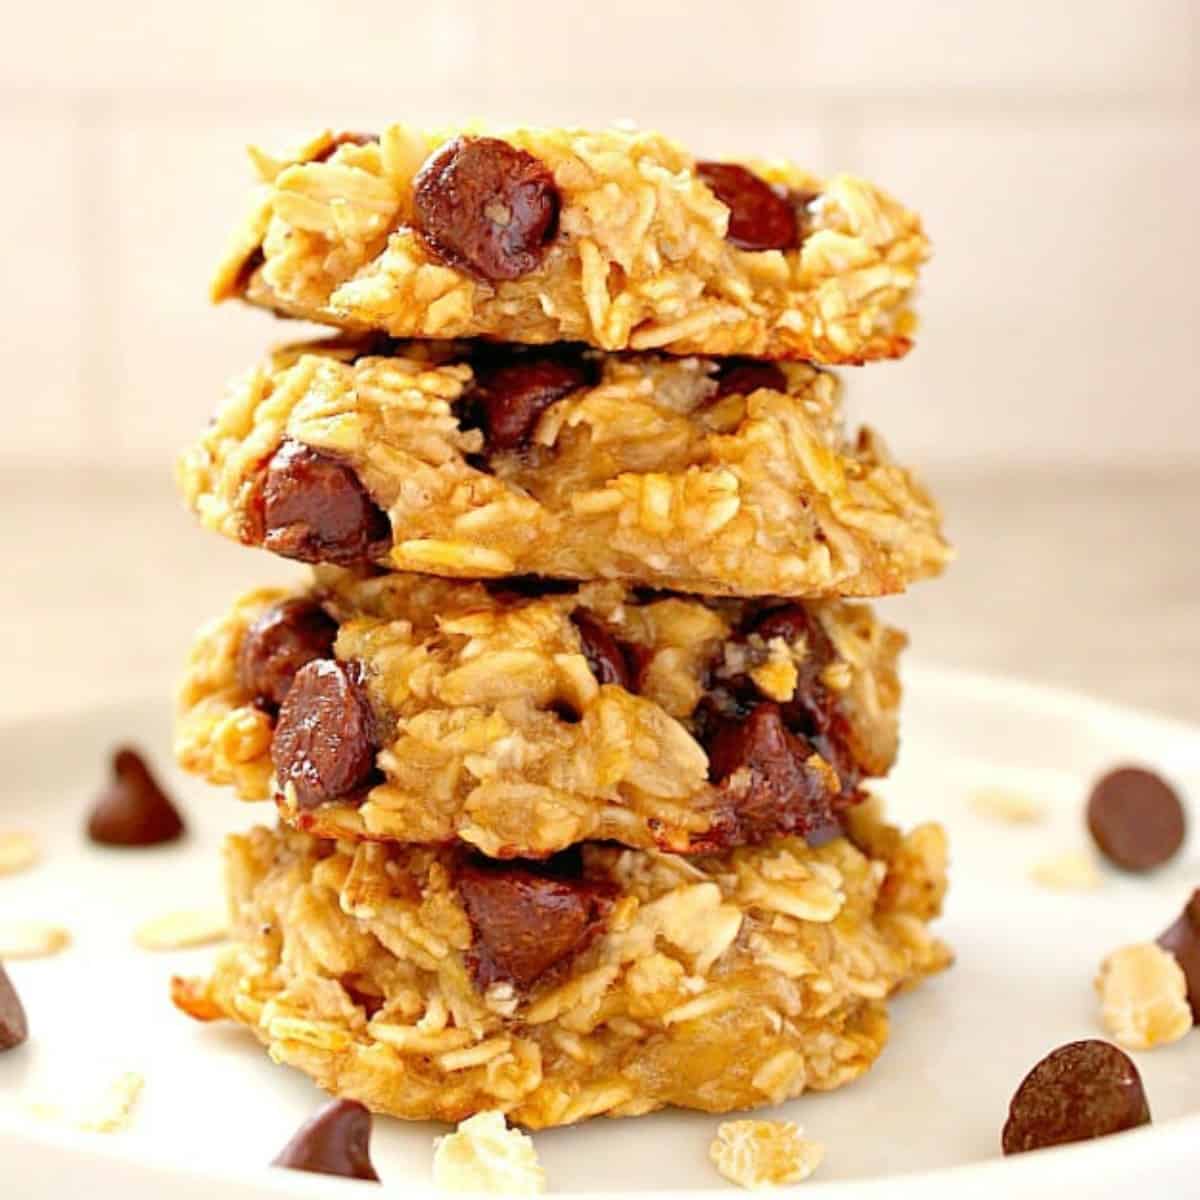 Oatmeal banana cookies stacked on plate.